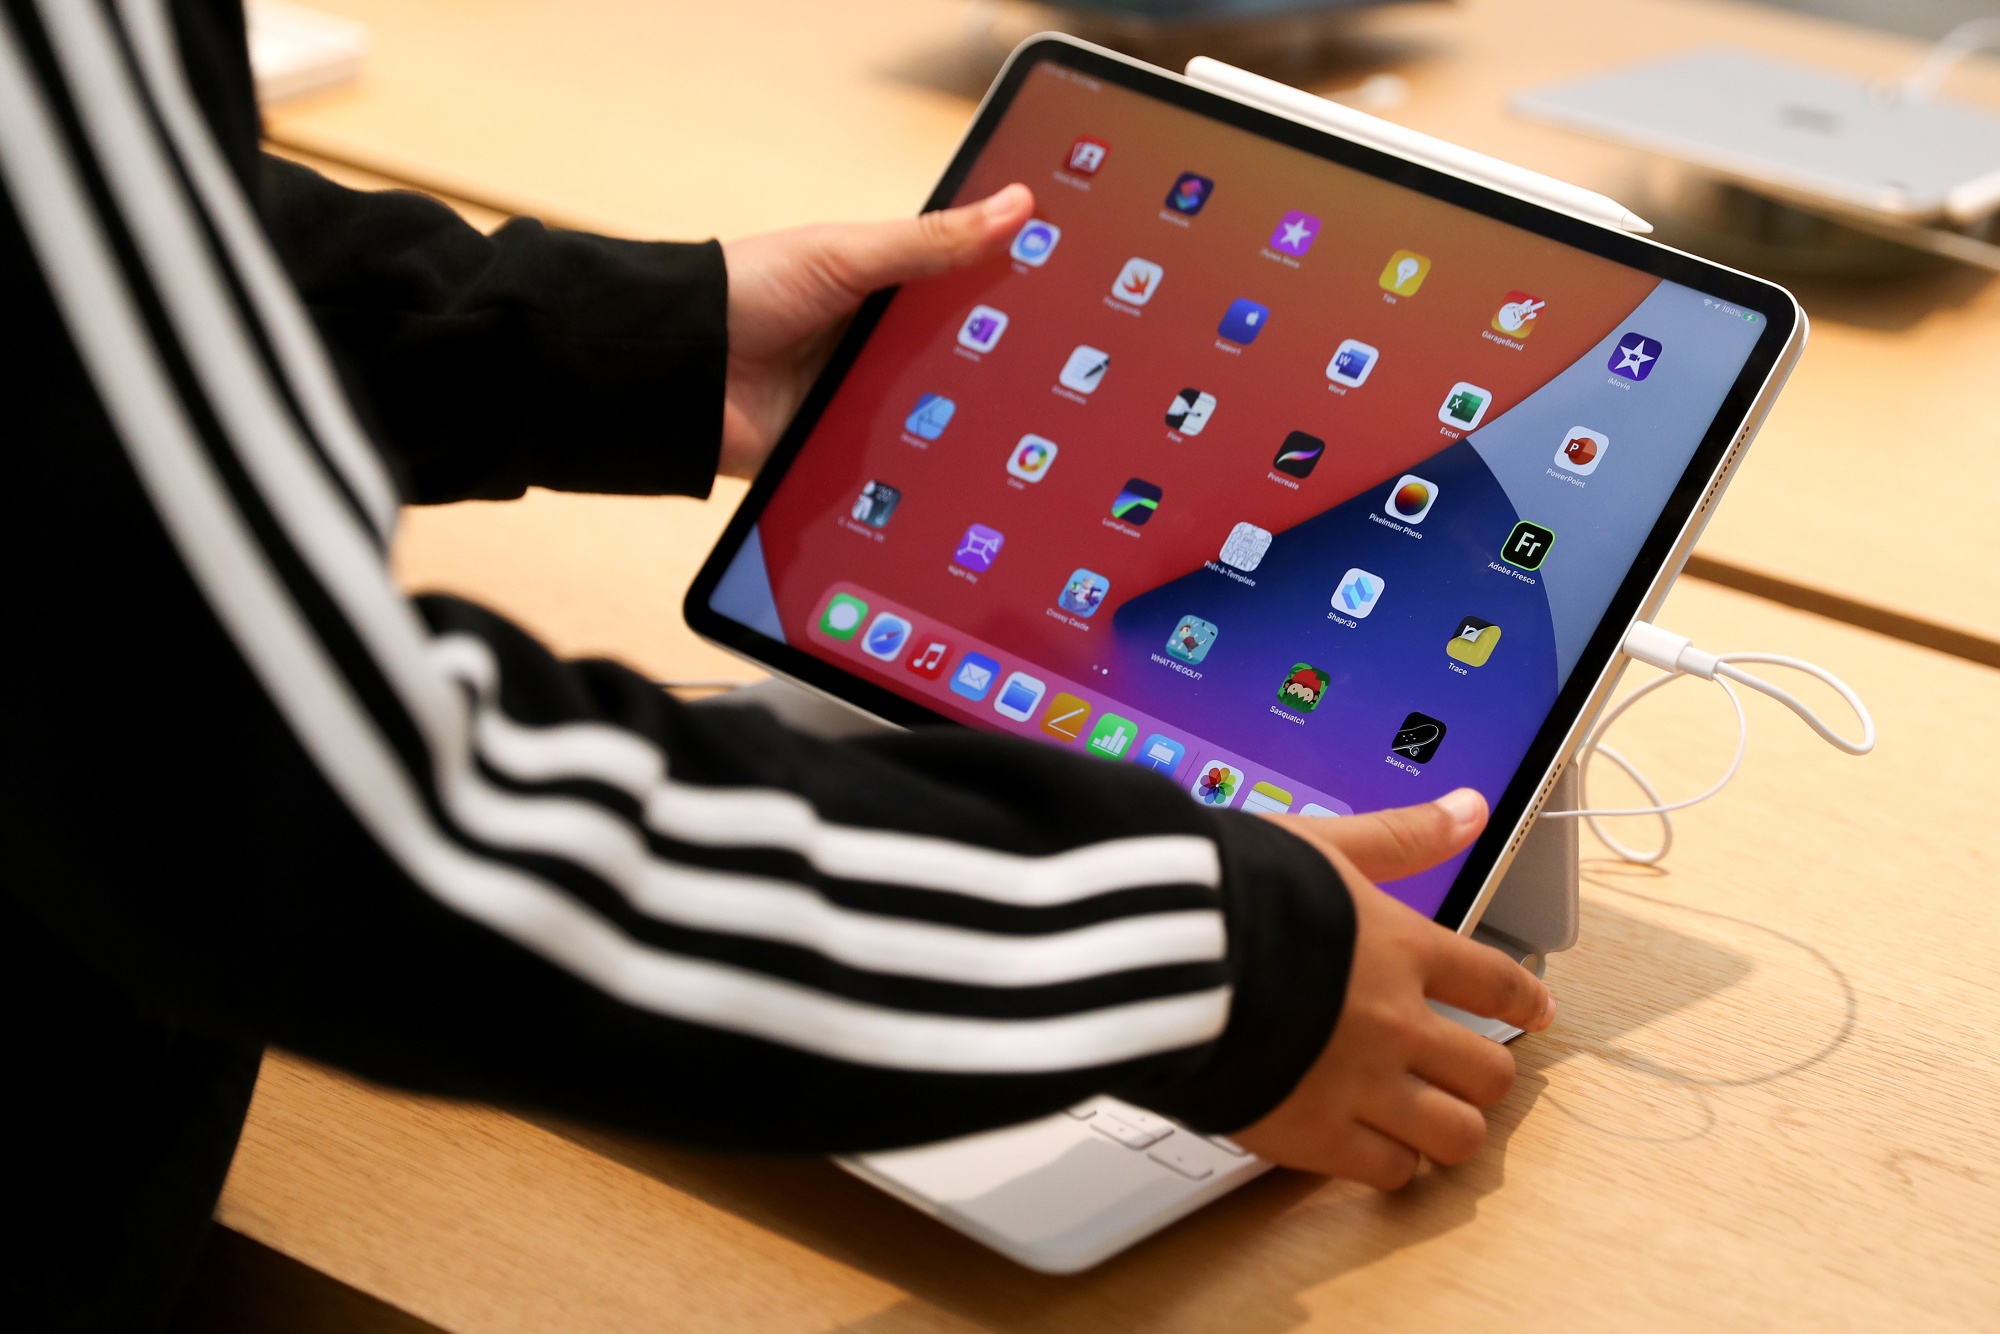 All-new iPad Air and iPad mini deliver dramatic power and